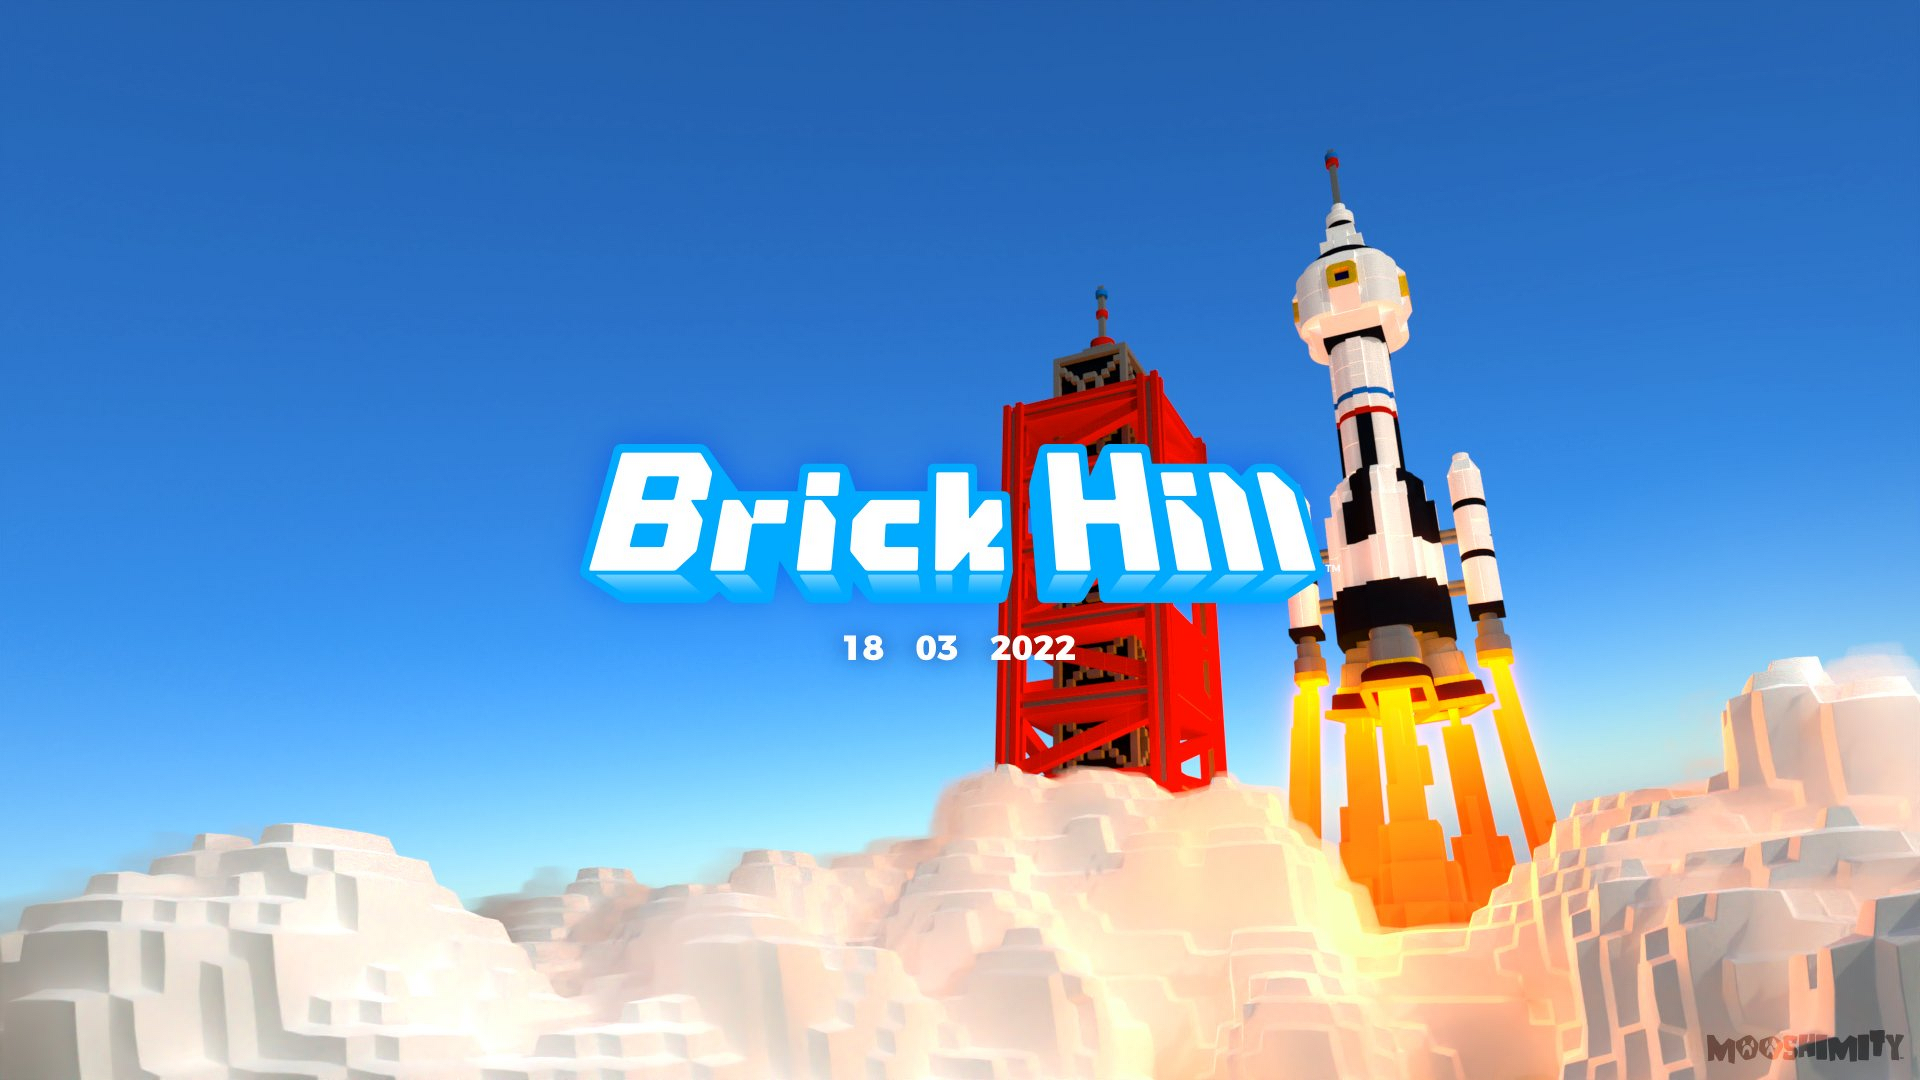 Brick Hill on X: Brick Hill turns six years old today and we're